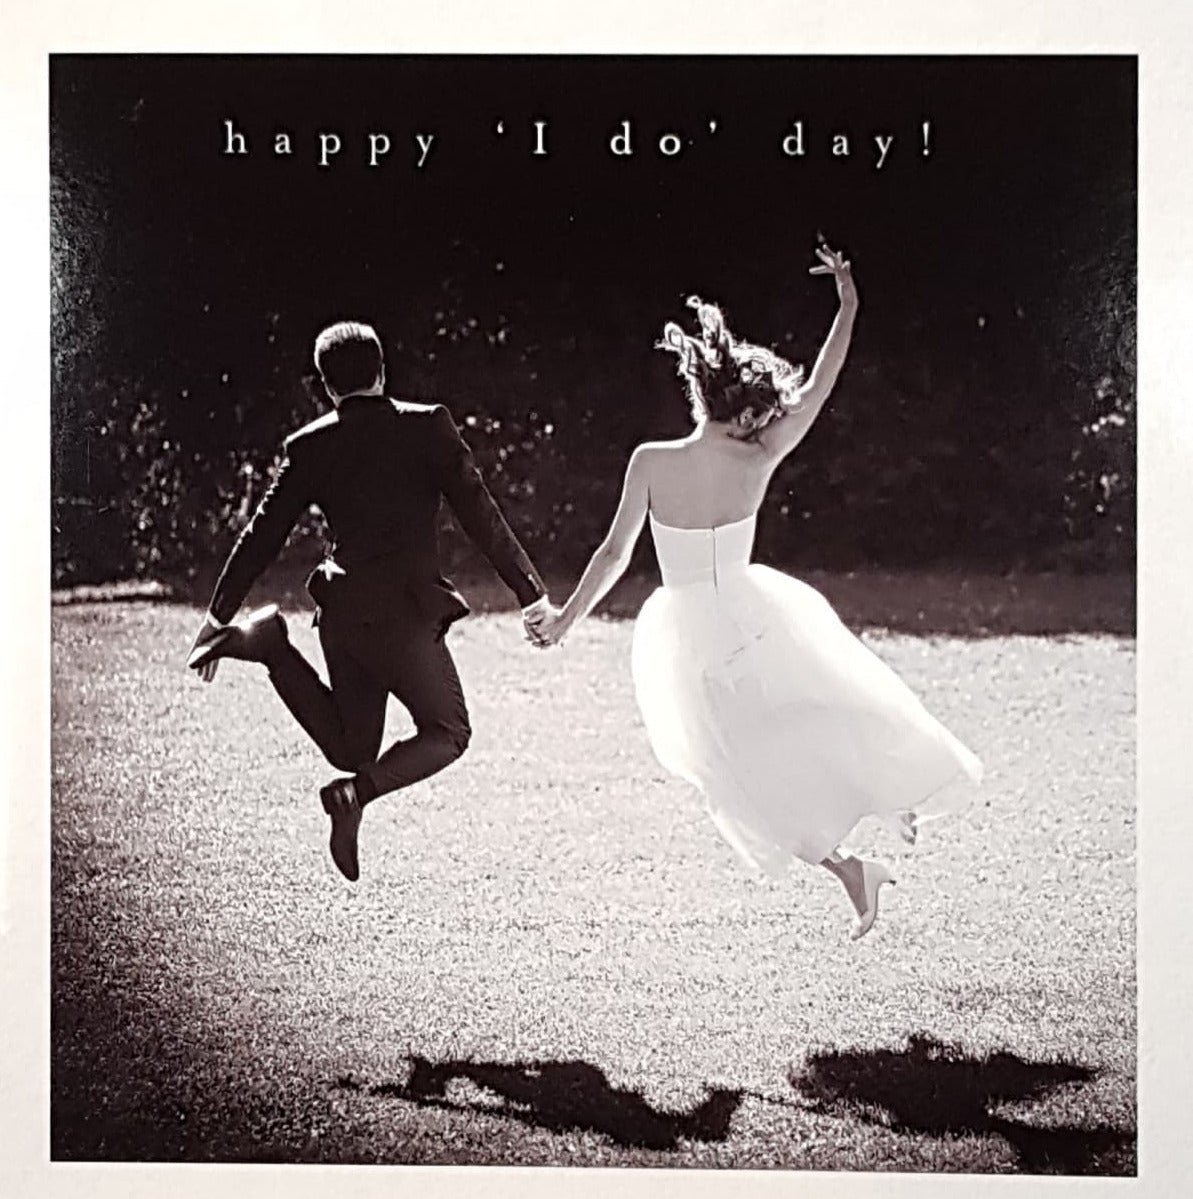 Wedding Card - General / Married Couple Jumping Mid-Air